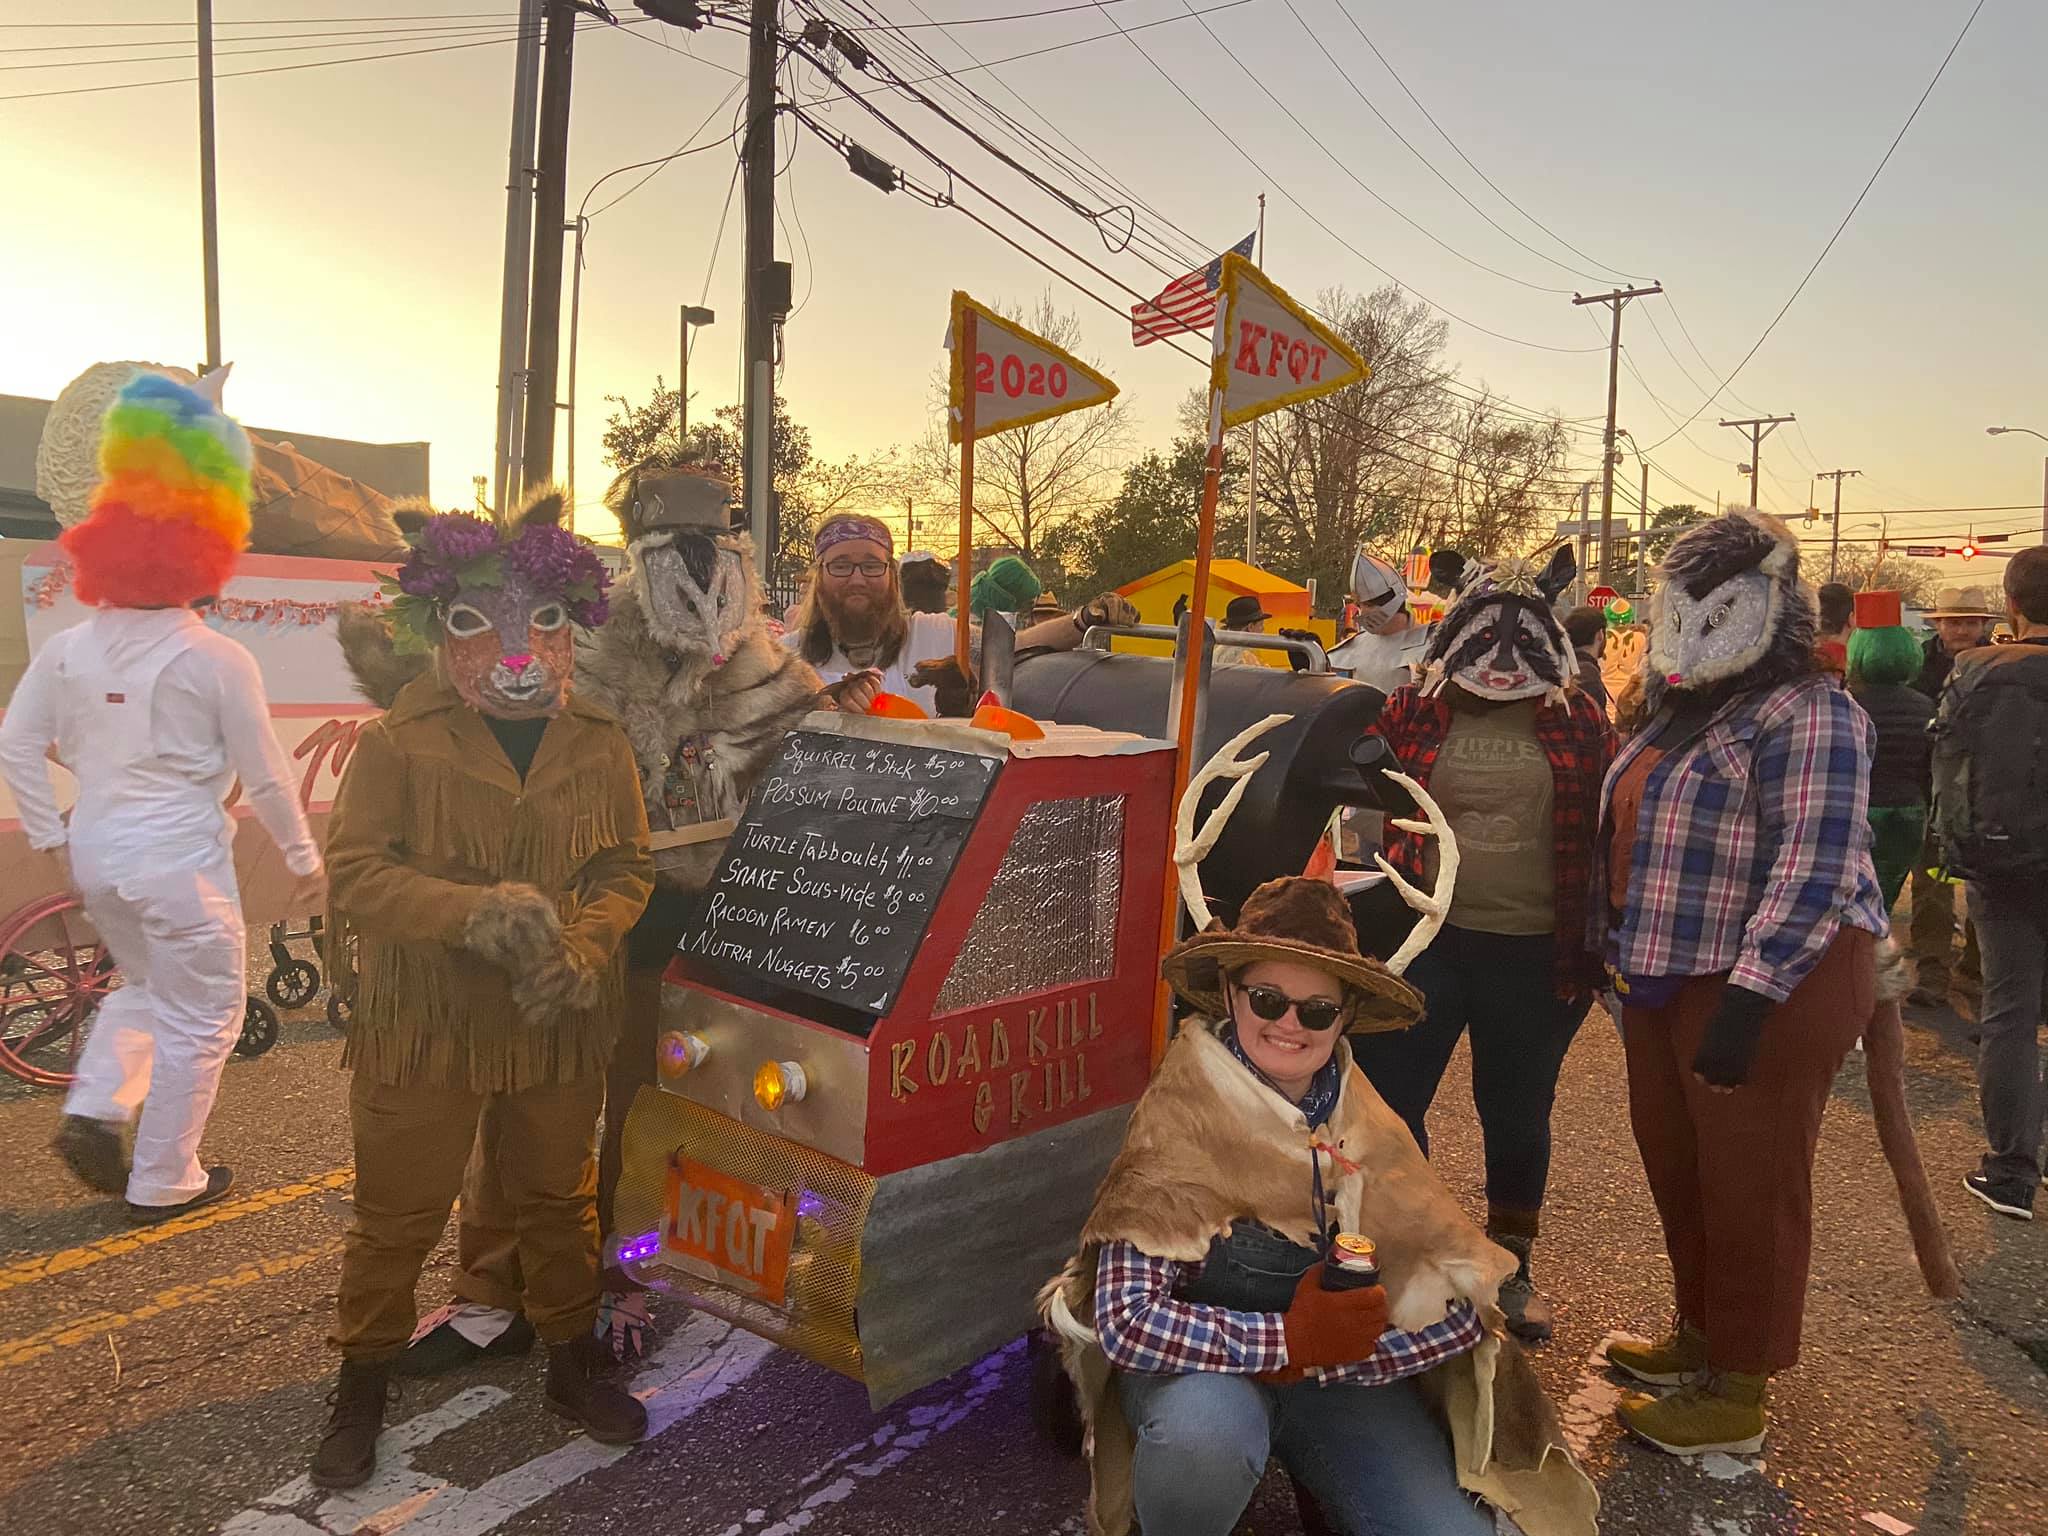 Krewe Fou Que Tchu Embraces a Cleaner, Greener, More Meaningful Mardi Gras